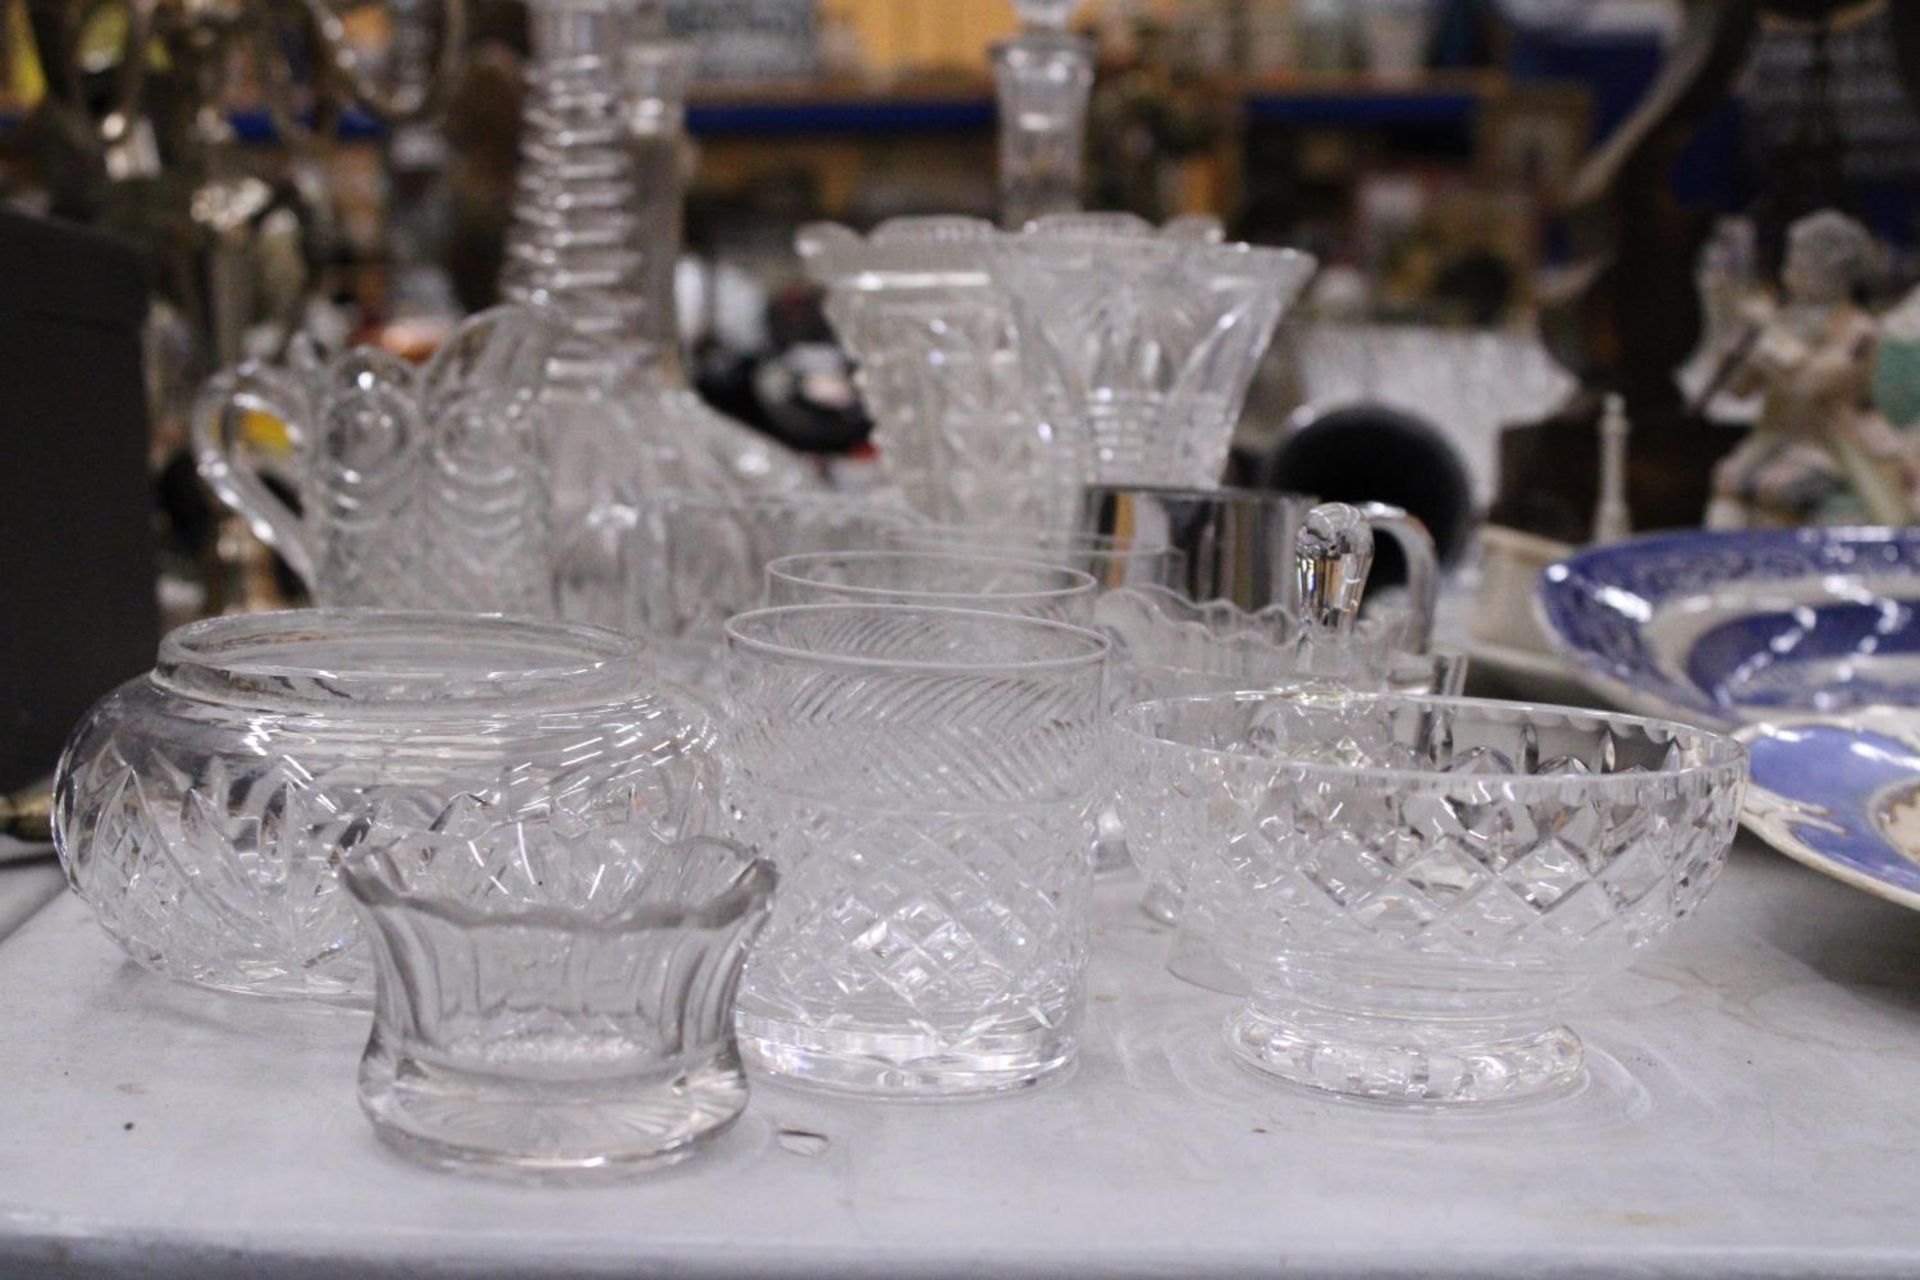 A QUANTITY OF GLASSWARE TO INCLUDE DECANTERS, VASES, JUGS, BOWLS, ETC - Image 6 of 6